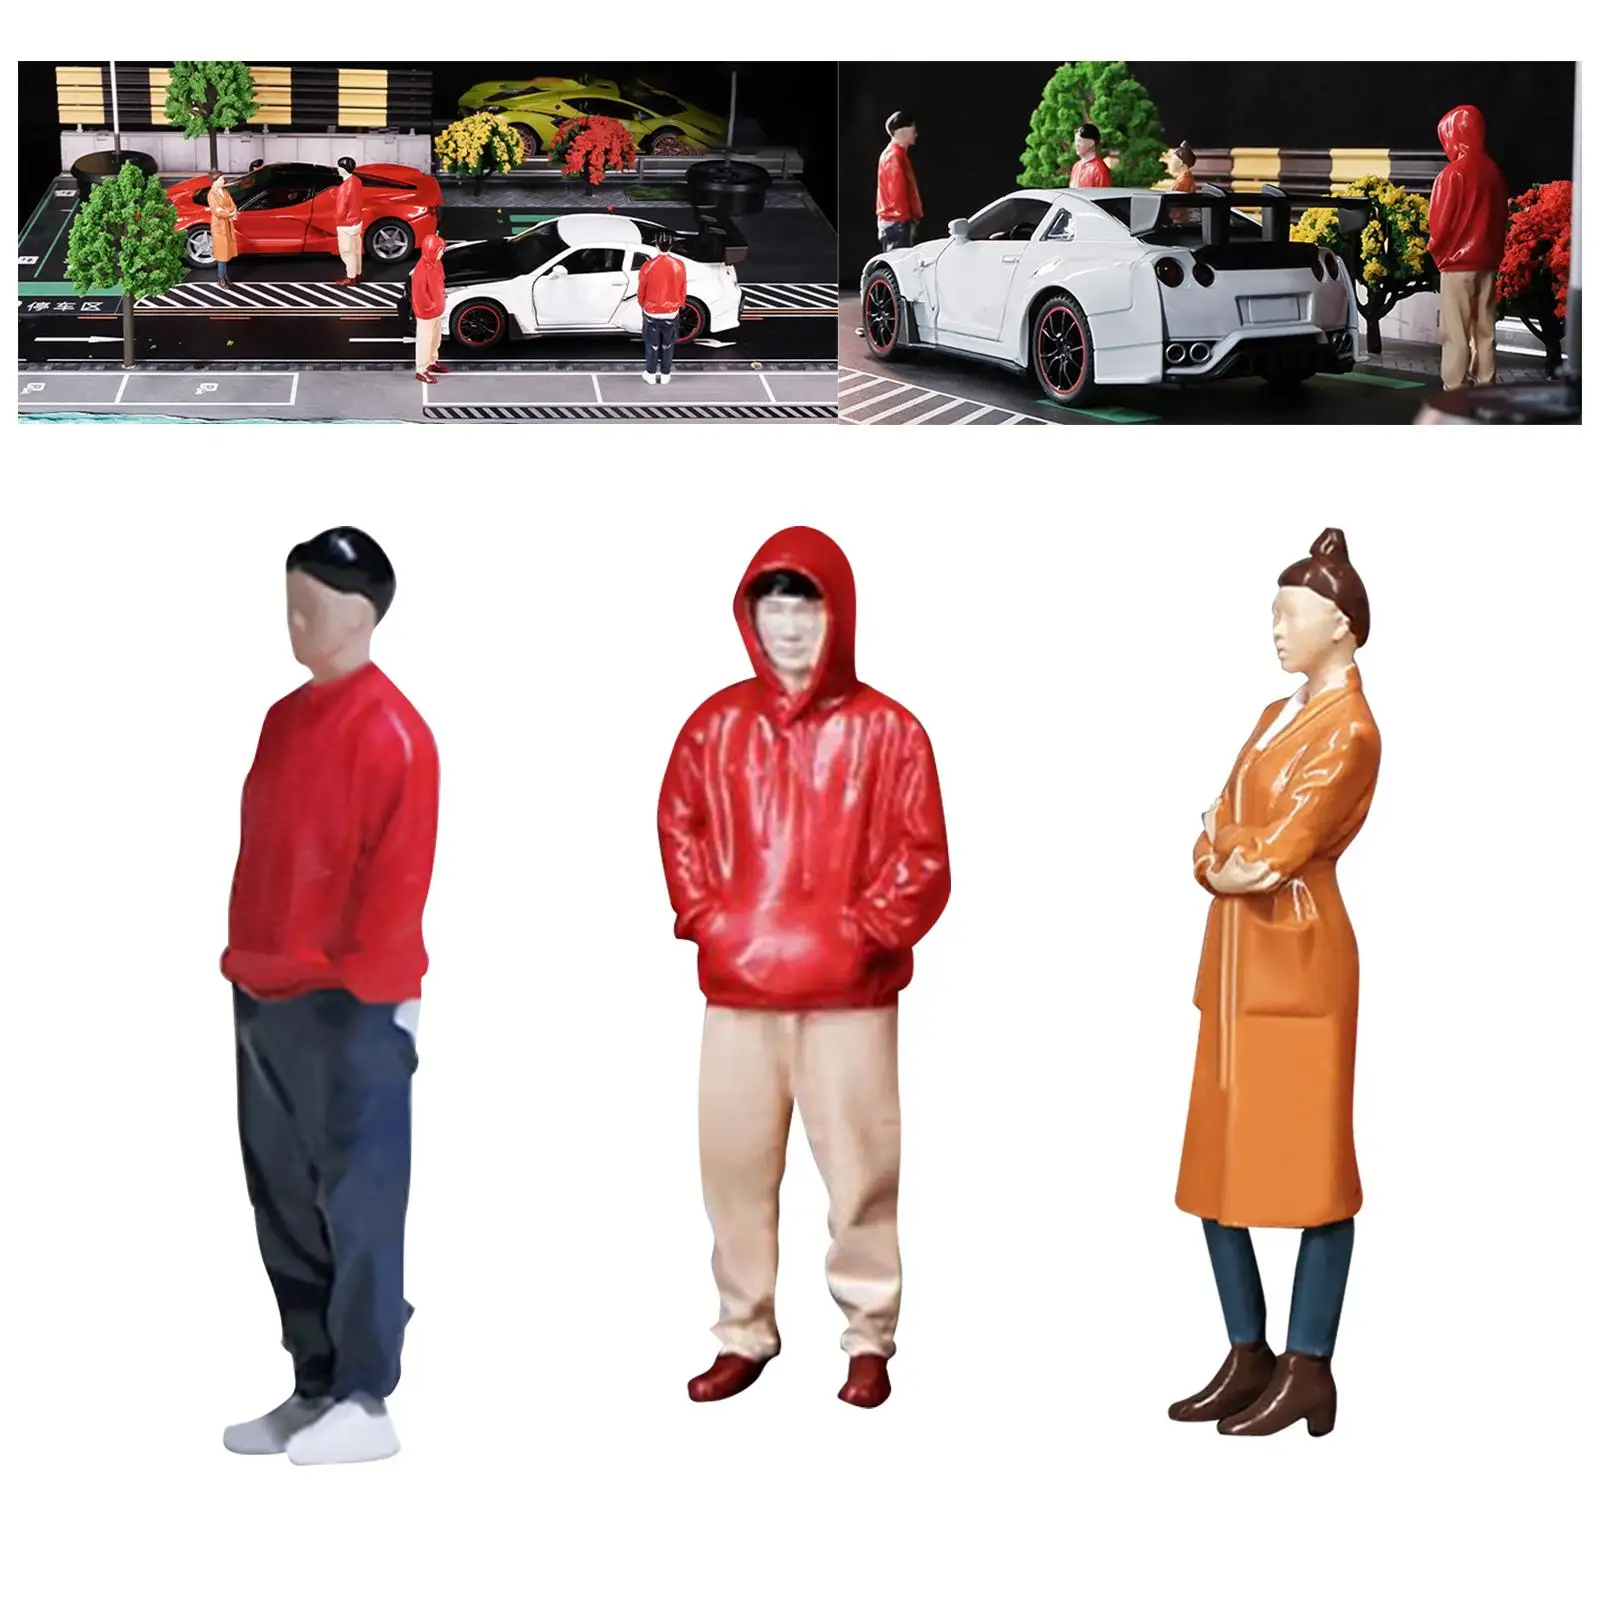 Realistic 1/64 People Figures Tiny People for DIY Projects Layout Ornament